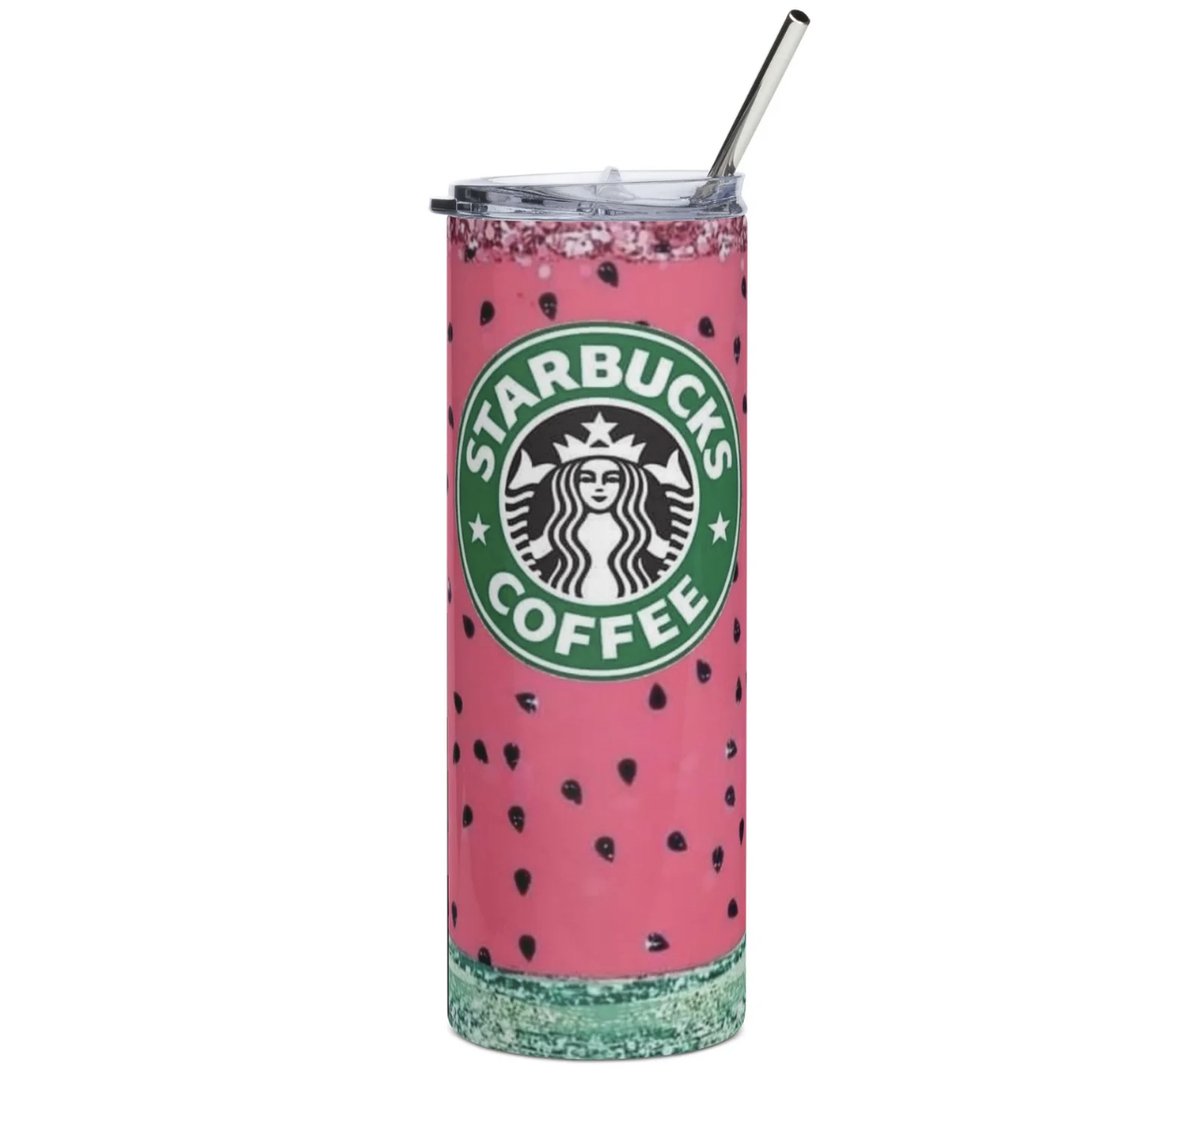 Watermelon Starbucks Skinny Tumbler!!! Perfect for the Summer vibes!!! $40.00 includes shipping in the US!!! 
#watermelon #starbucks #watermelonstarbuckscup #watermelonstarbucks
#Starbucksskinnytumbler
#skinnytumbler #skinnytumbler20oz #summer #summervibes #summerfun